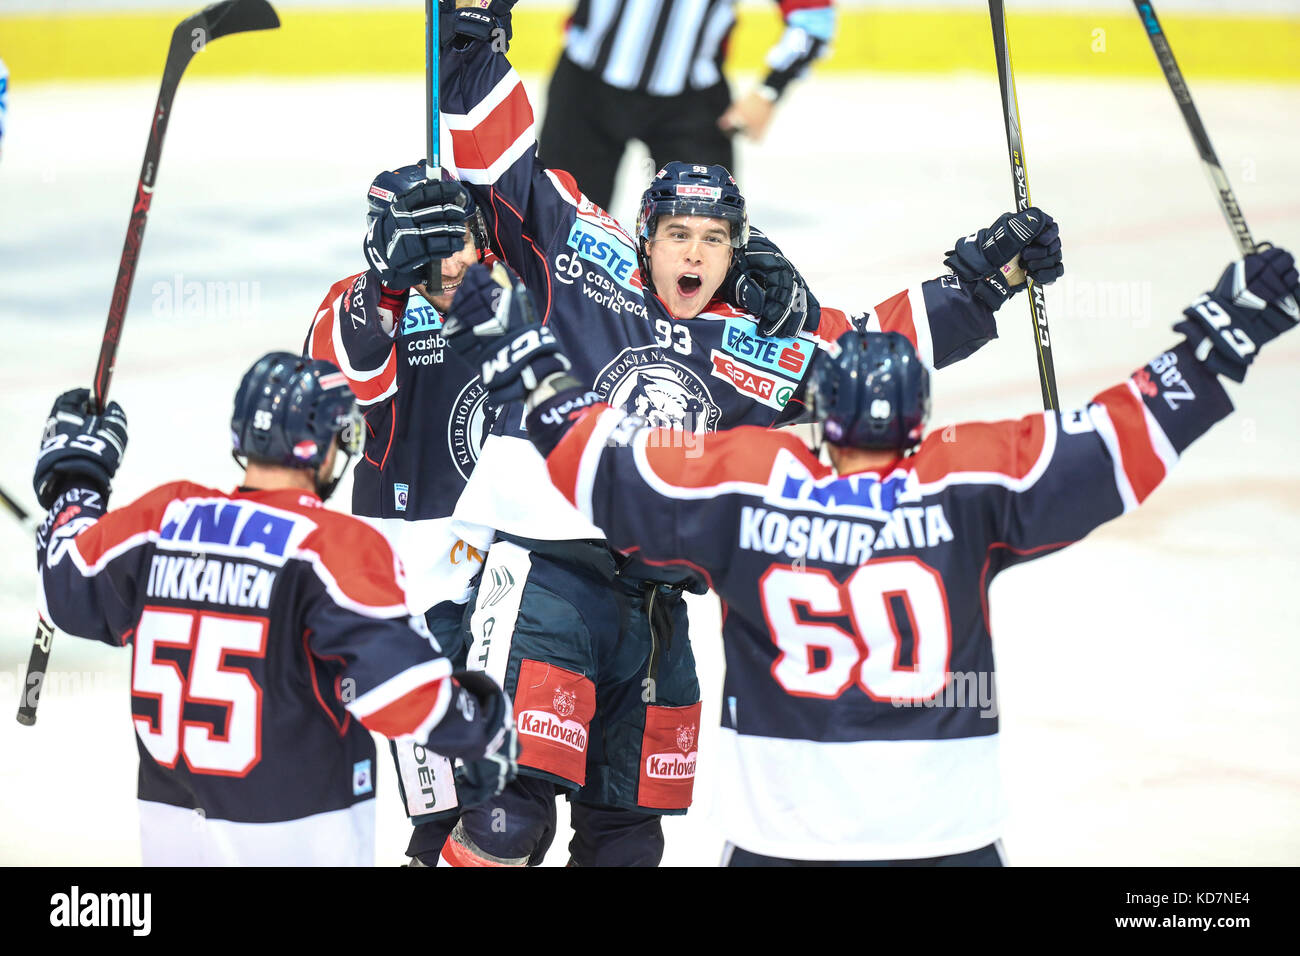 Zagreb, Croatia. 10th Oct, 2017. Mike Aviani(C) of KHL Medvescak celebrate with teammates after scoring a goal during the EBEL (Erste Bank Eishockey Liga) ice hockey league match between KHL Medvescak and EC VSV in Zagreb, Croatia, on Oct. 10, 2017. KHL Medvescak won 5-2. Credit: Igor Soban/Xinhua/Alamy Live News Stock Photo